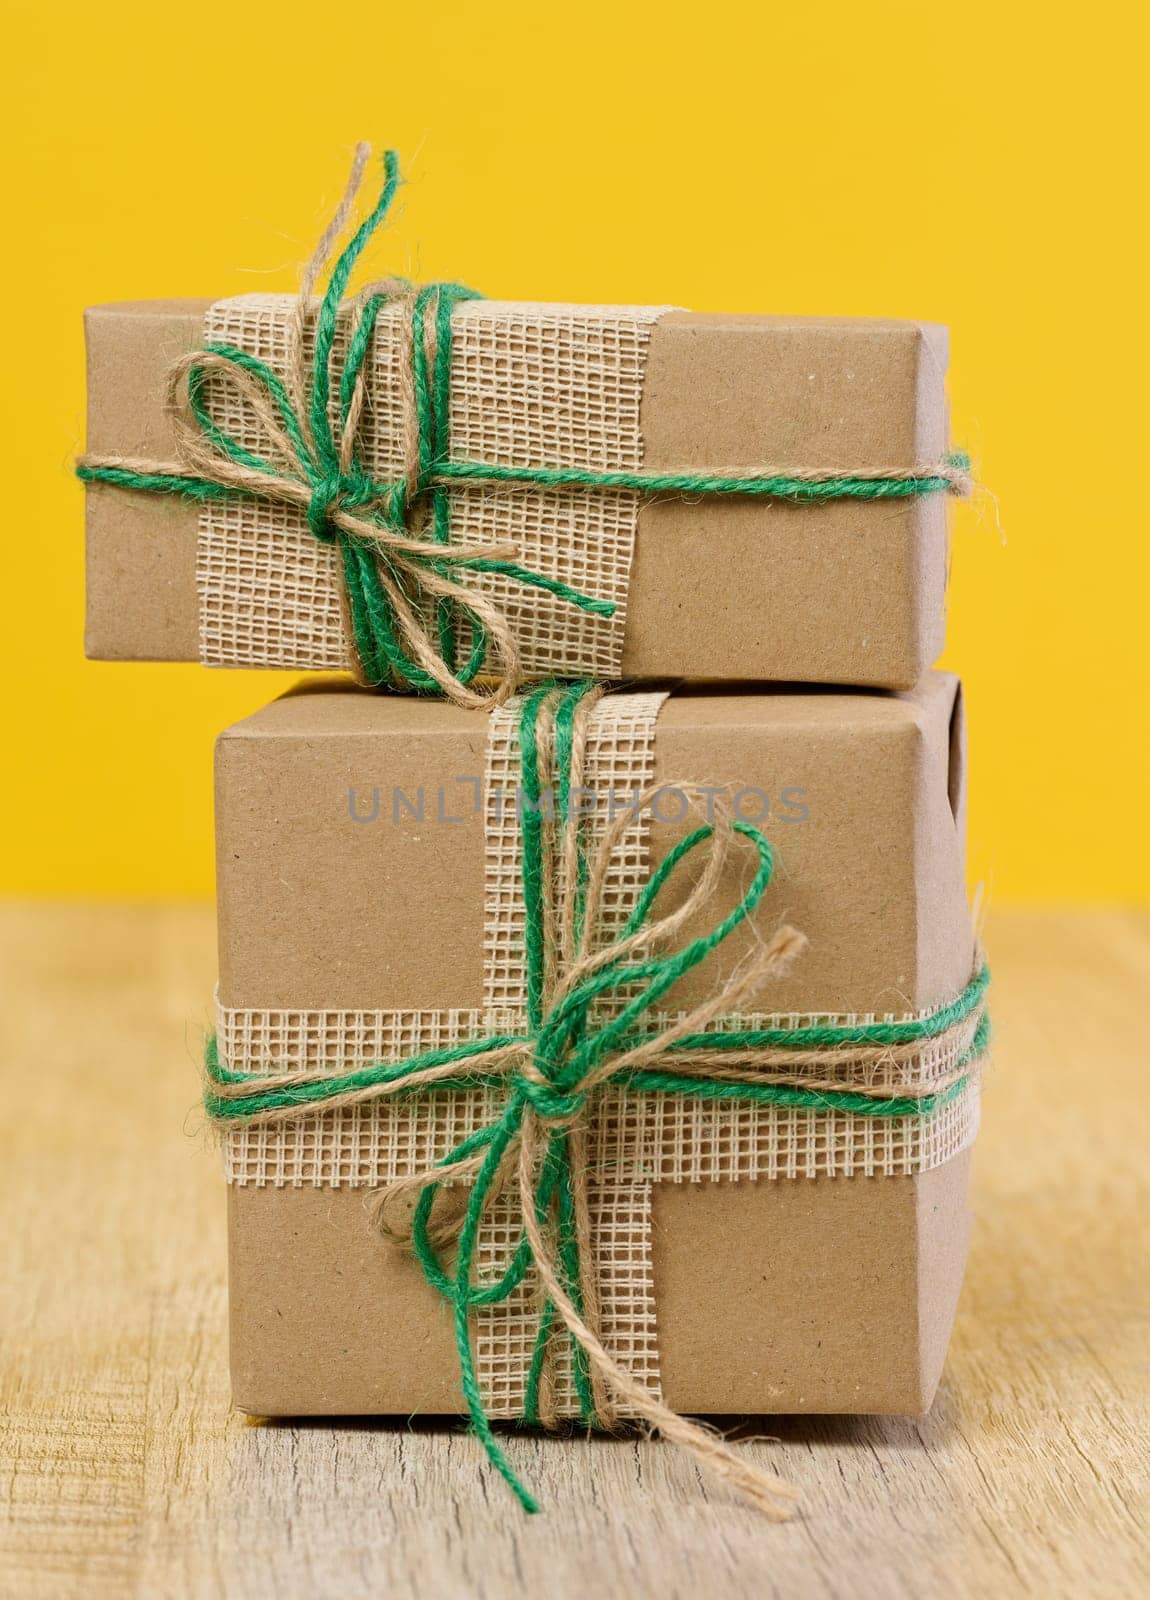 The box is packed in brown craft paper and tied with a rope on a beige background, gift